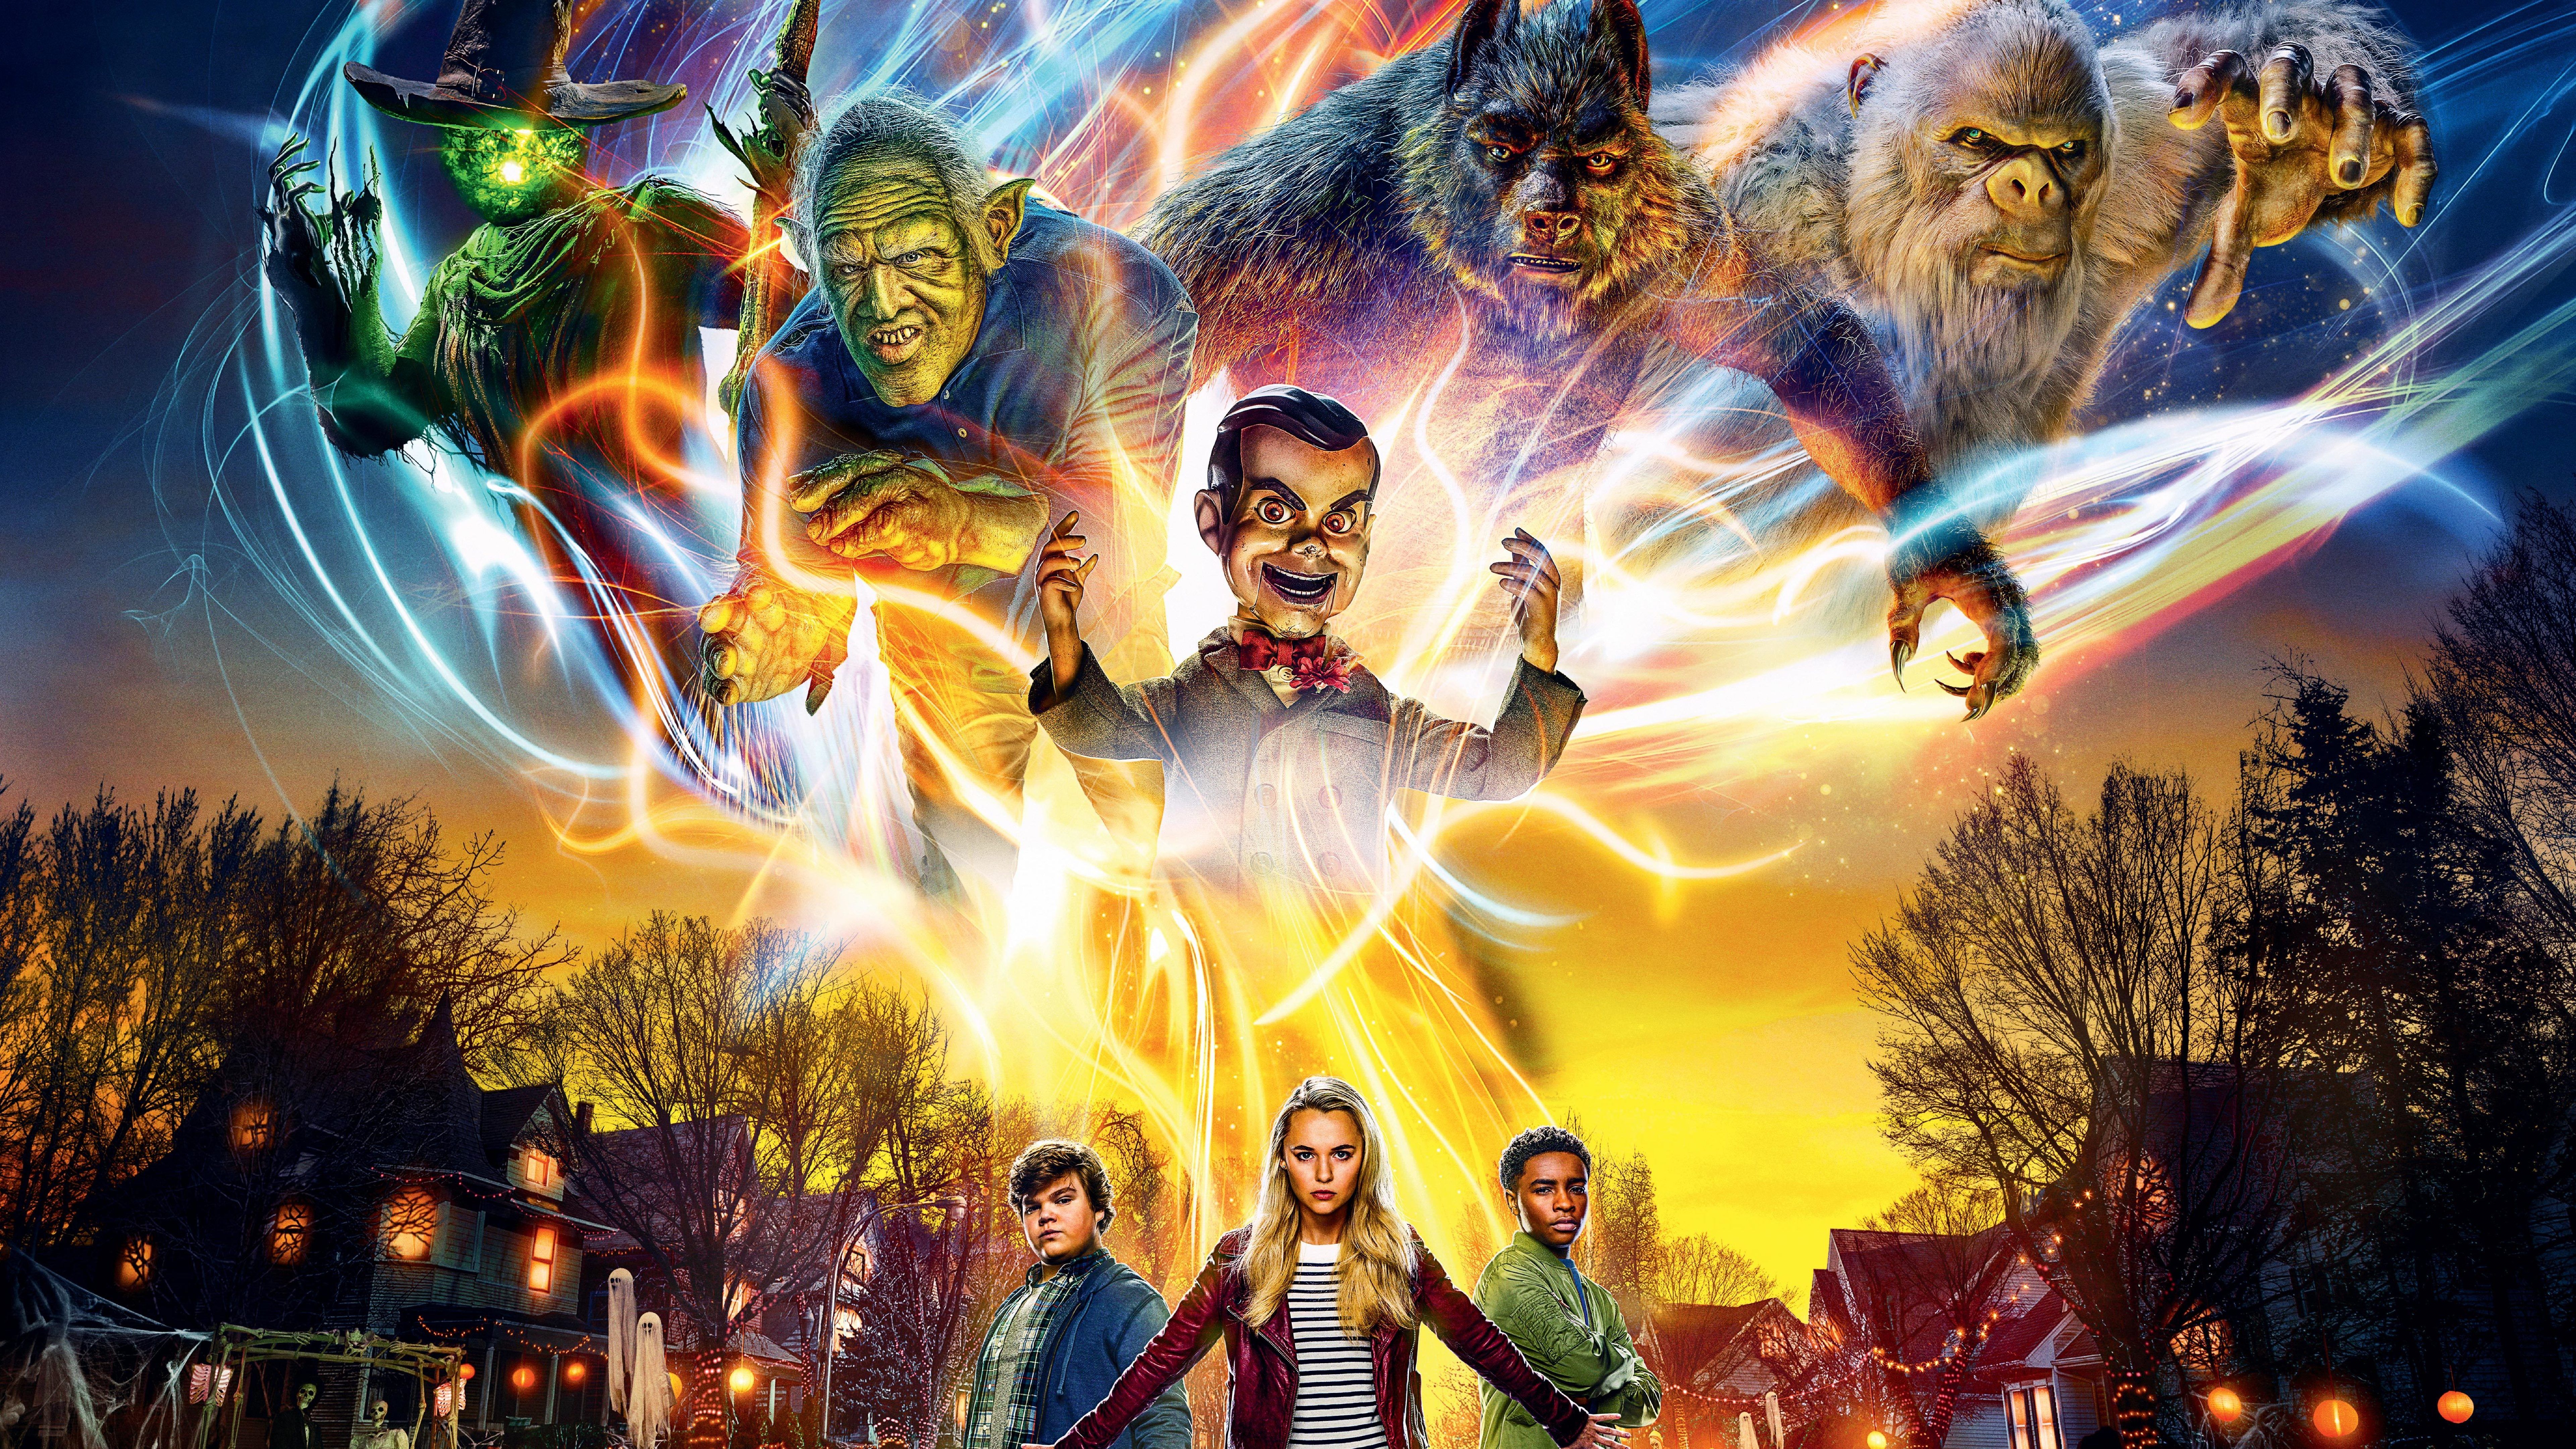 Goosebumps 2 Haunted Halloween 2018 Movie 8K Wallpaper, HD Movies 4K Wallpaper, Image, Photo and Background